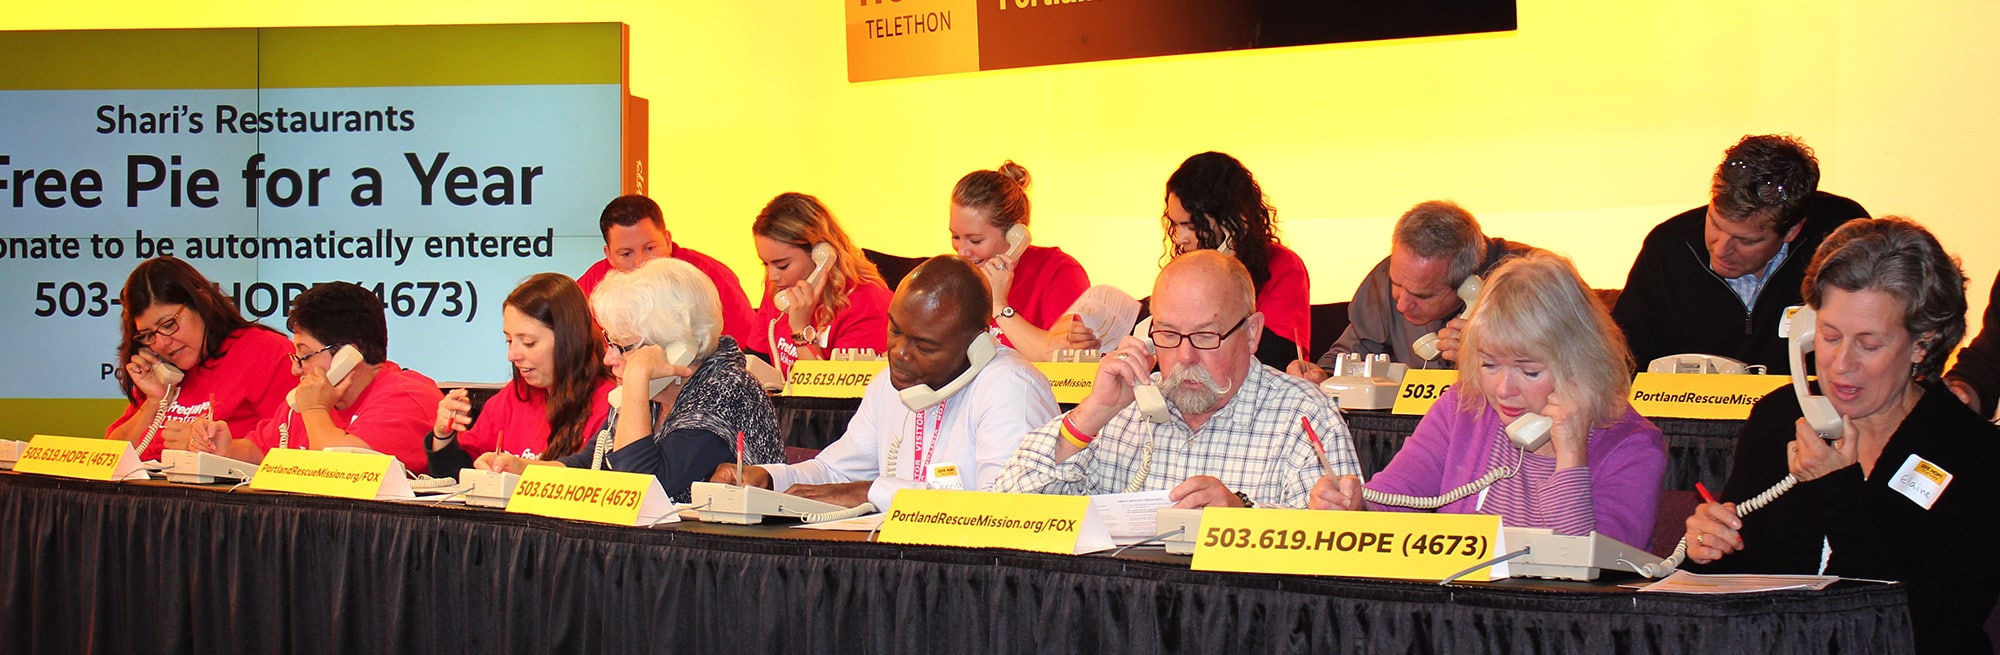 Volunteer to answer phones at a telethon or radiothon event